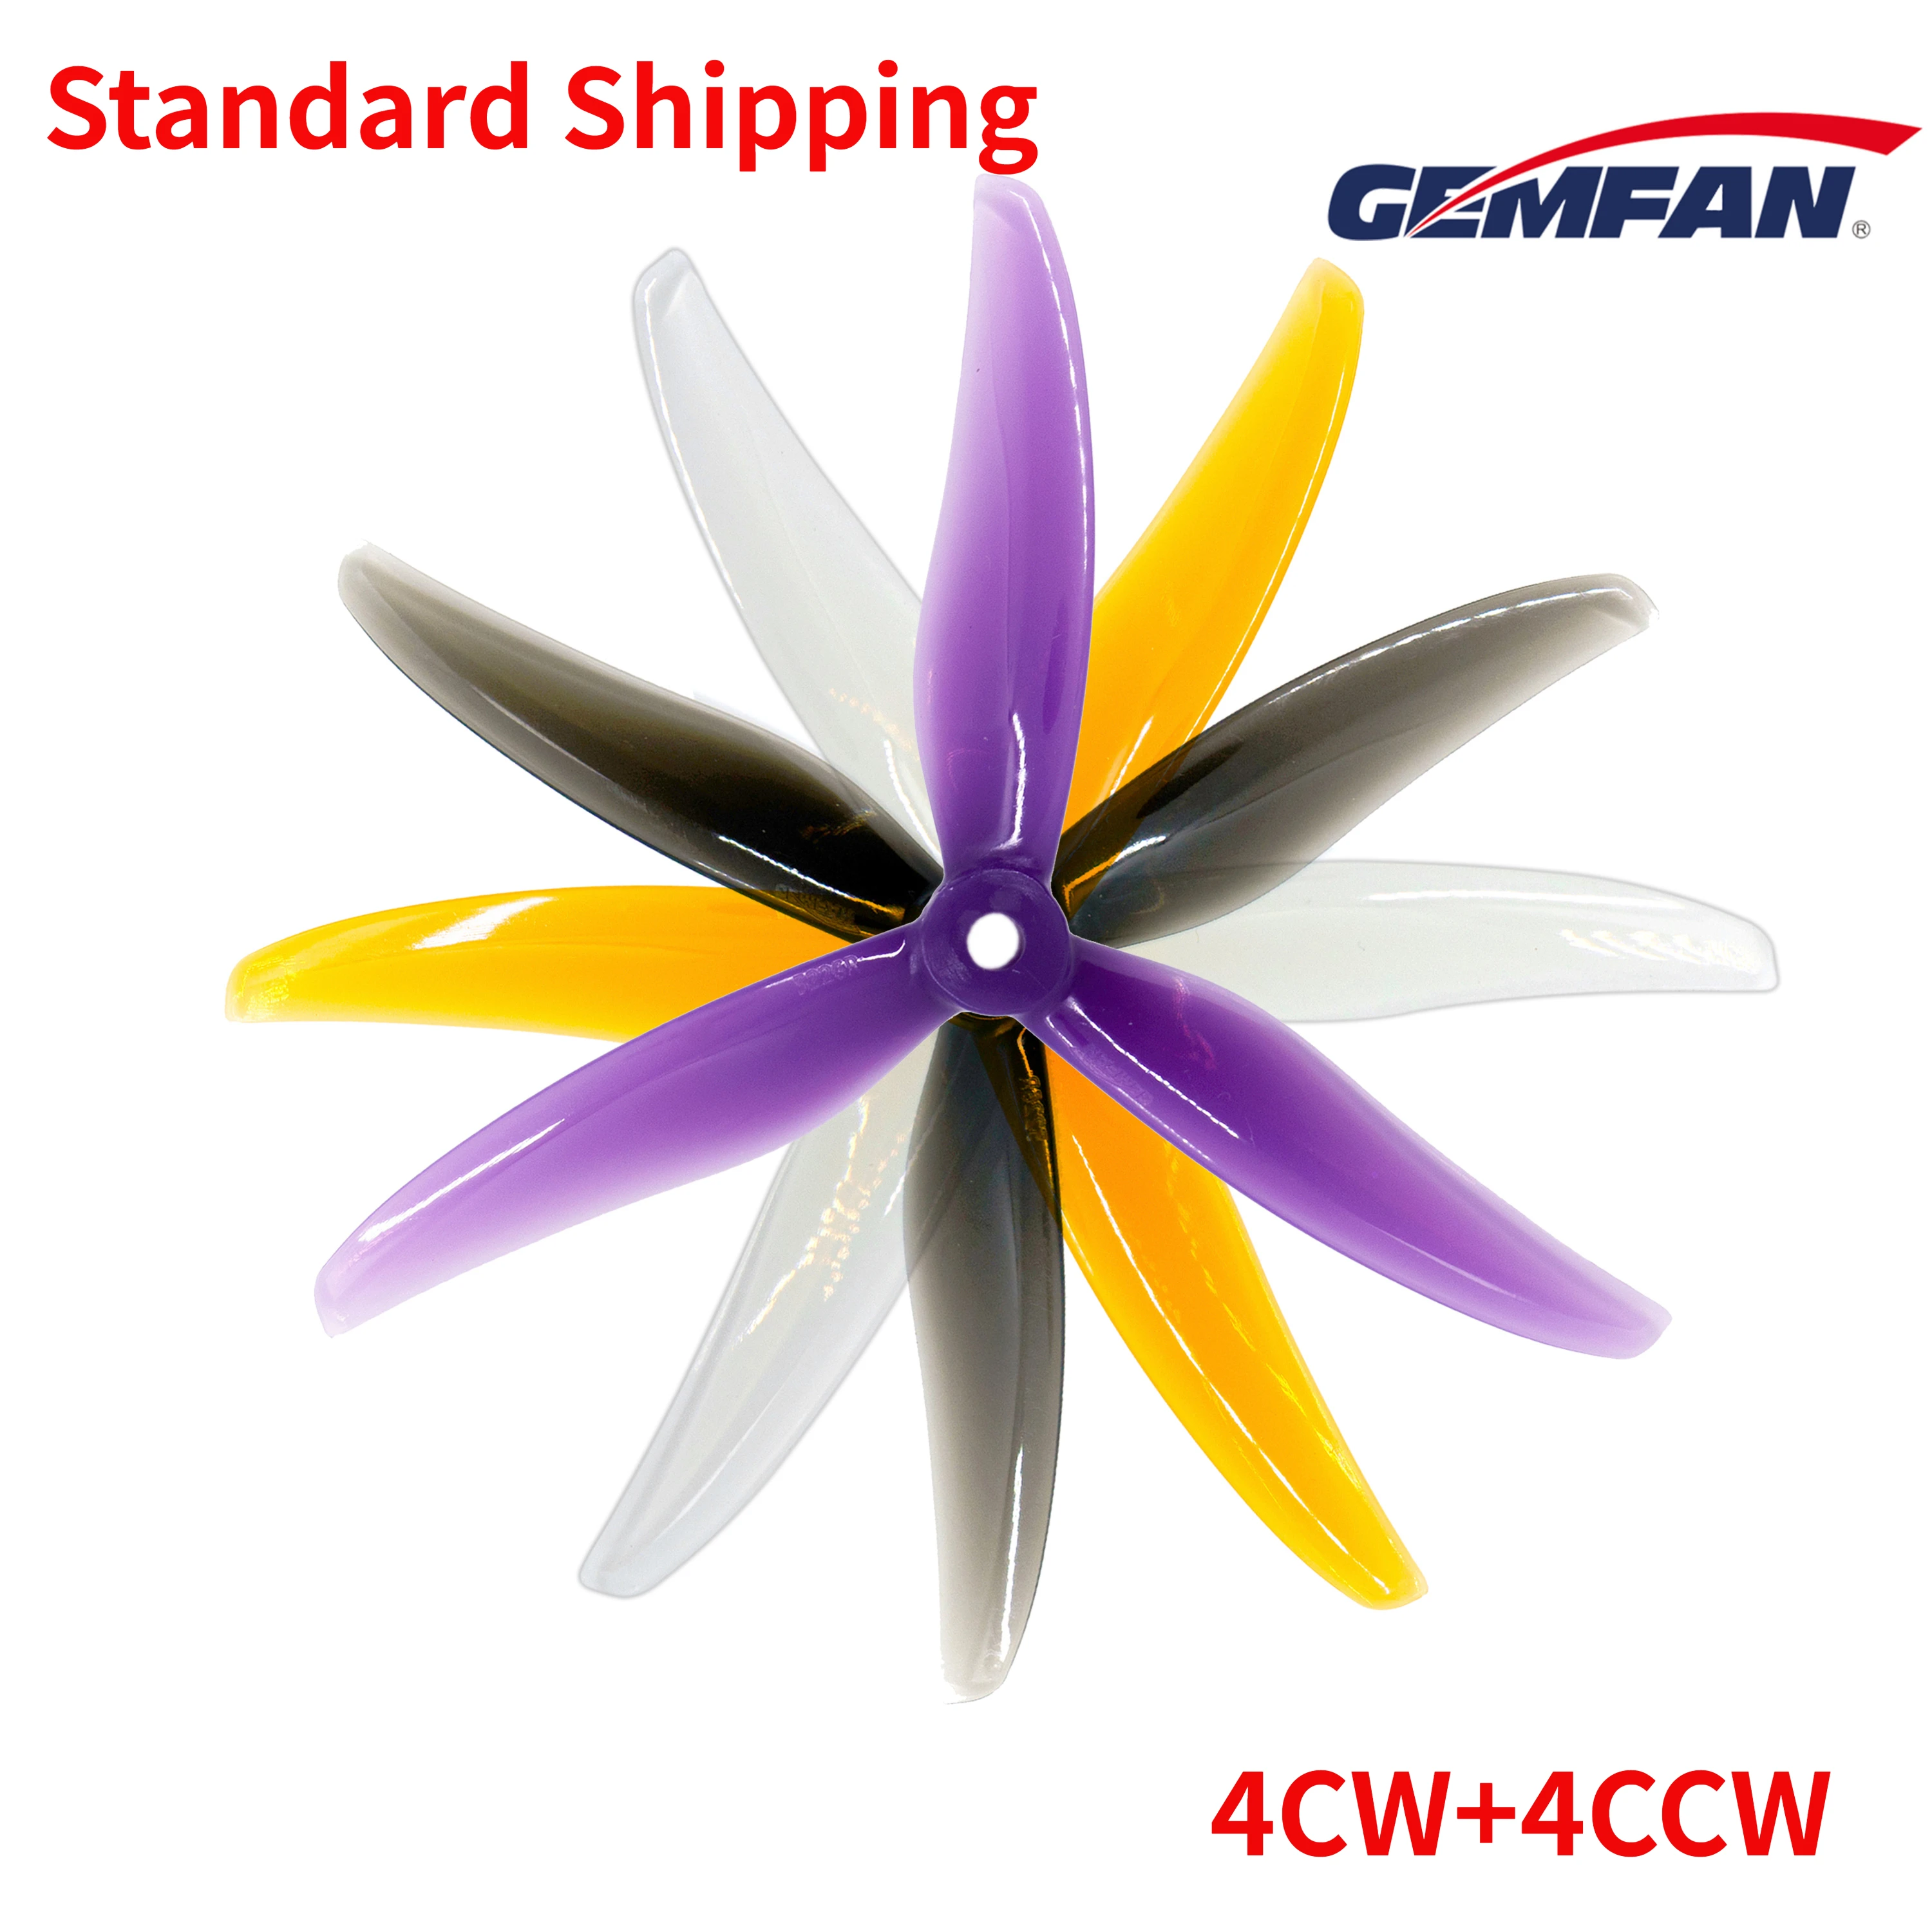 

6Pairs(6CW+6CCW) Gemfan Hurricane 5236 5.2X3.6X3 3-Blade PC Propeller Faster More Powerful for RC FPV Freestyle 5inch Drones